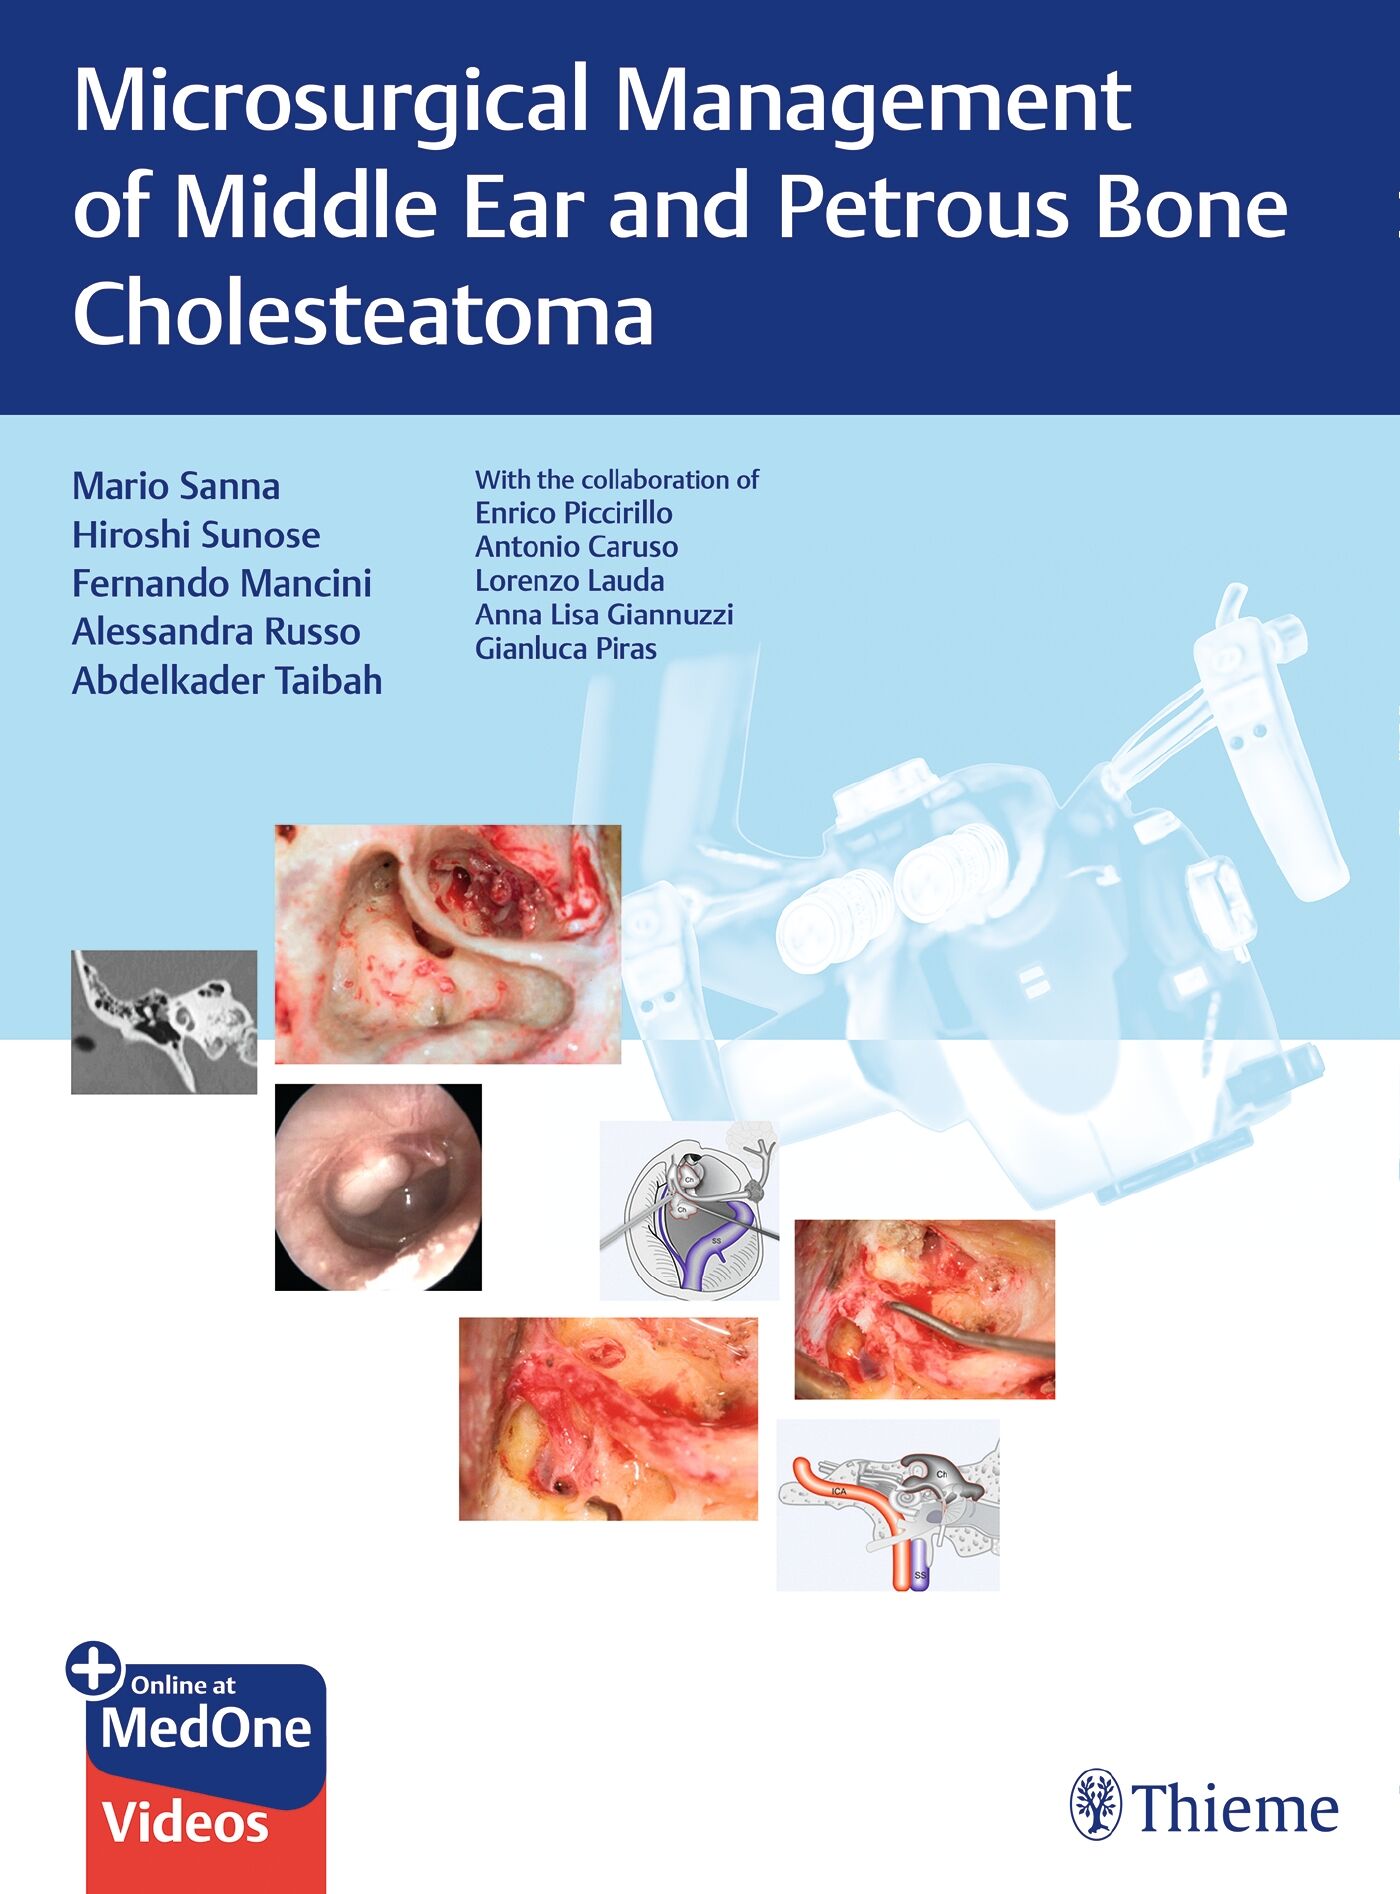 Microsurgical Management of Middle Ear and Petrous Bone Cholesteatoma, 9783132582590